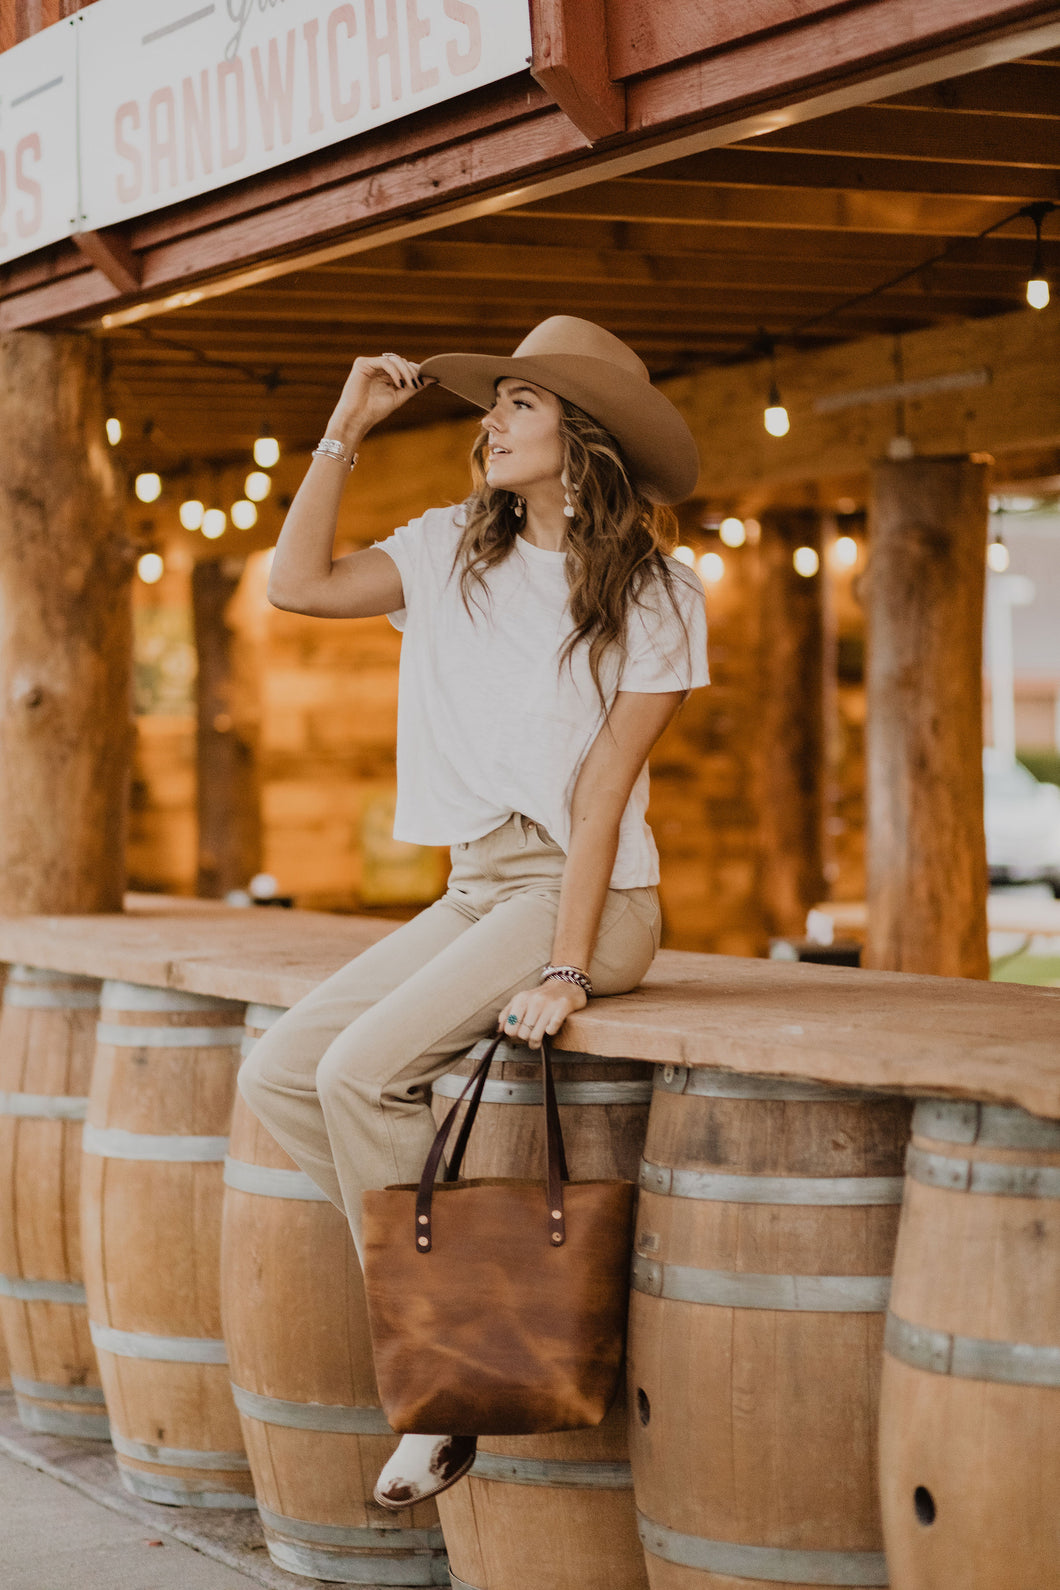 Harper Tote in color Tennessee Whiskey